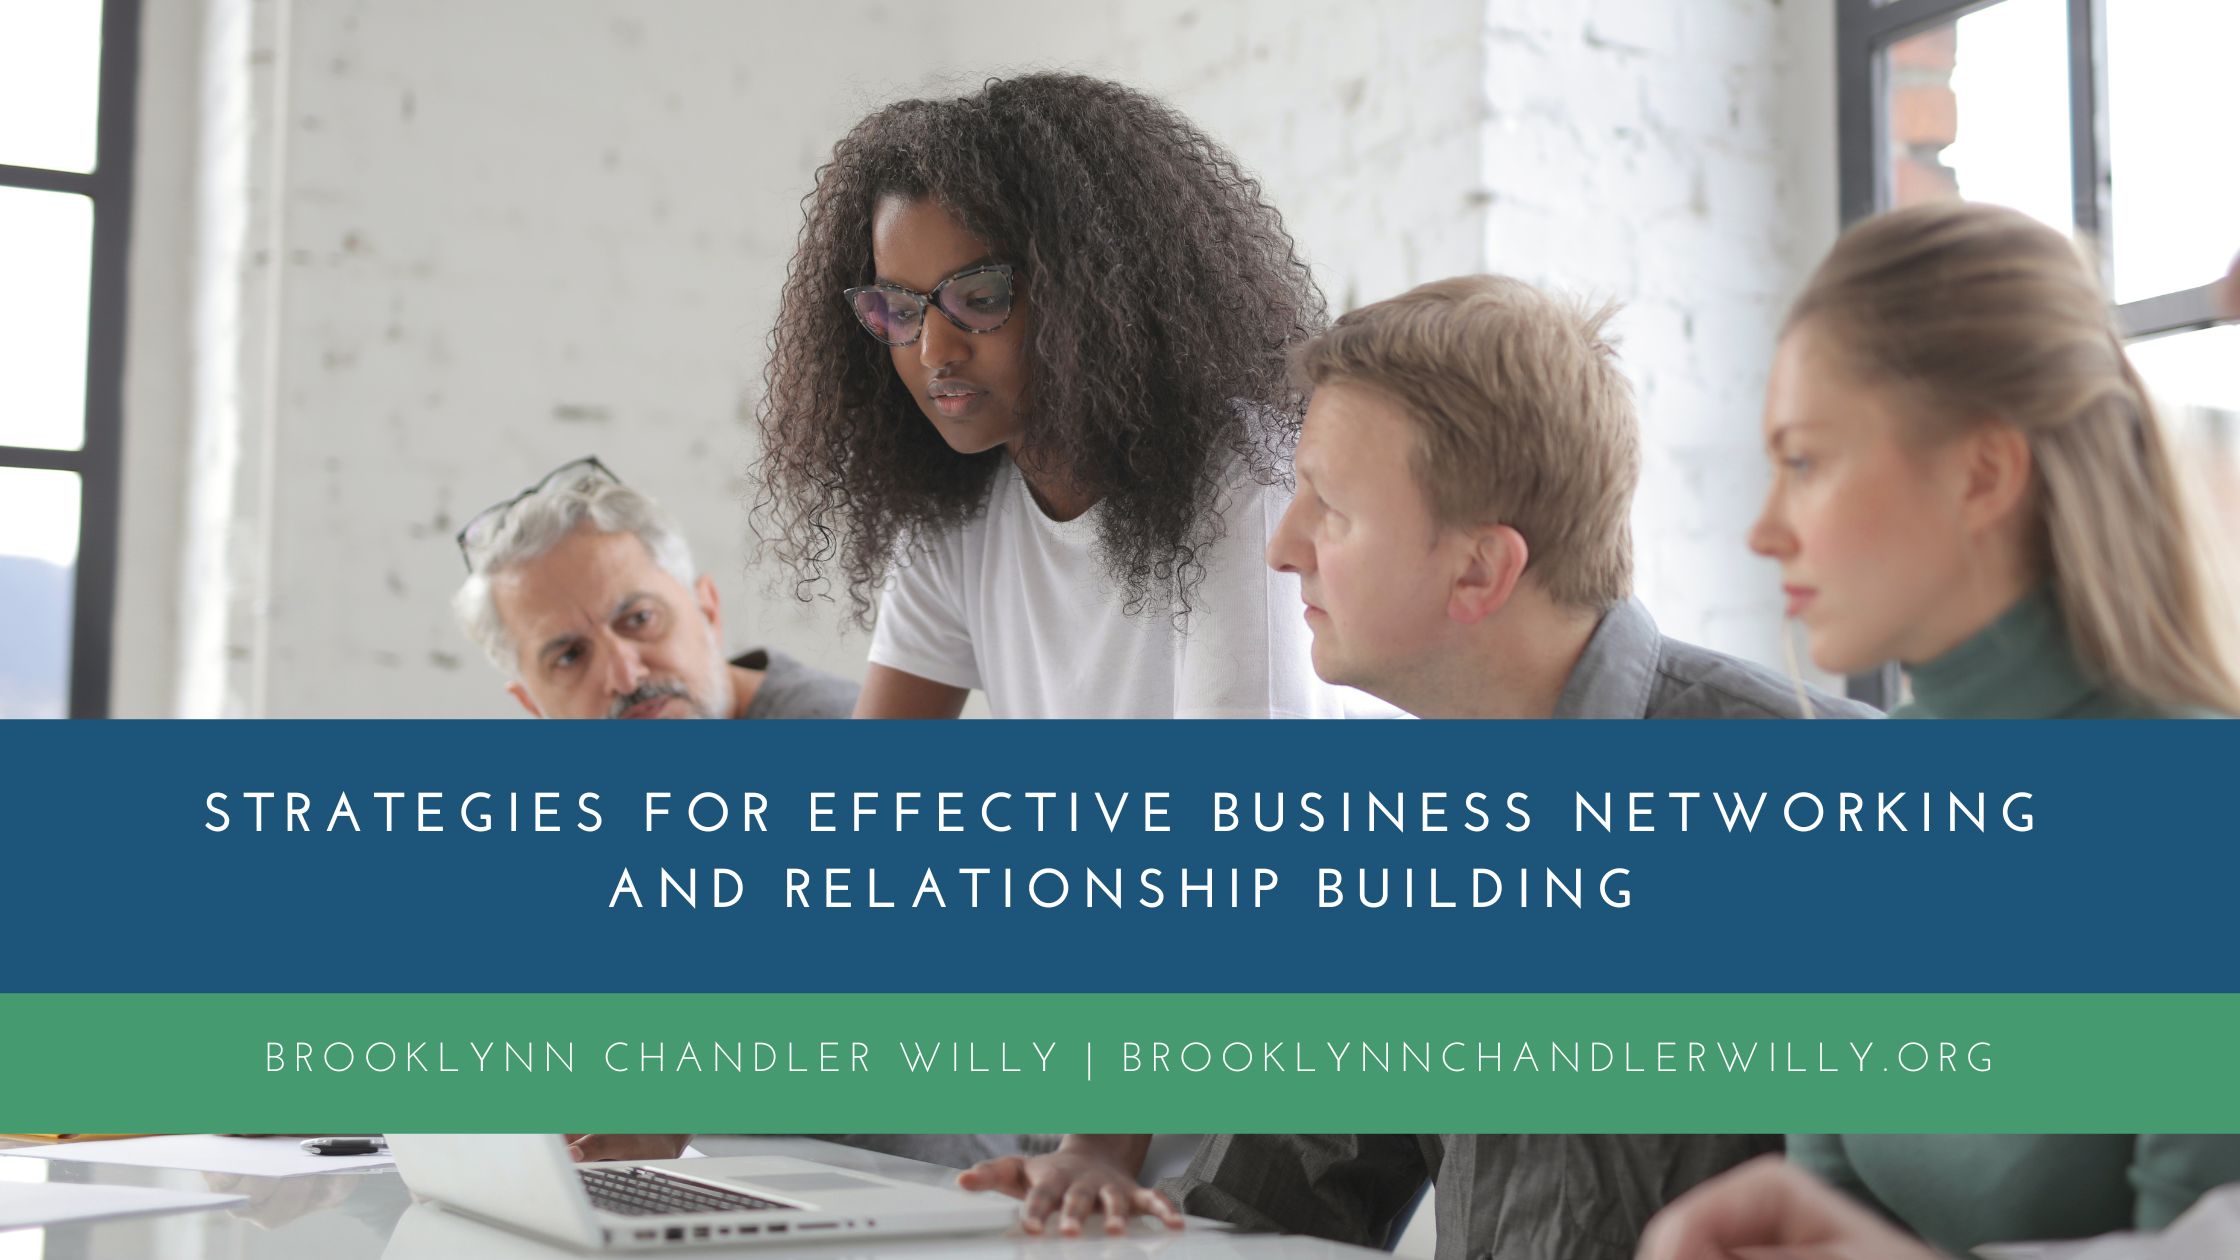 STRATEGIES FOR EFFECTIVE BUSINESS NETWORKING
AND RELATIONSHIP BUILDING

BROOKLYNN CHANDLER WILLY | BROOKLYNNCHANDLERWILLY.ORG